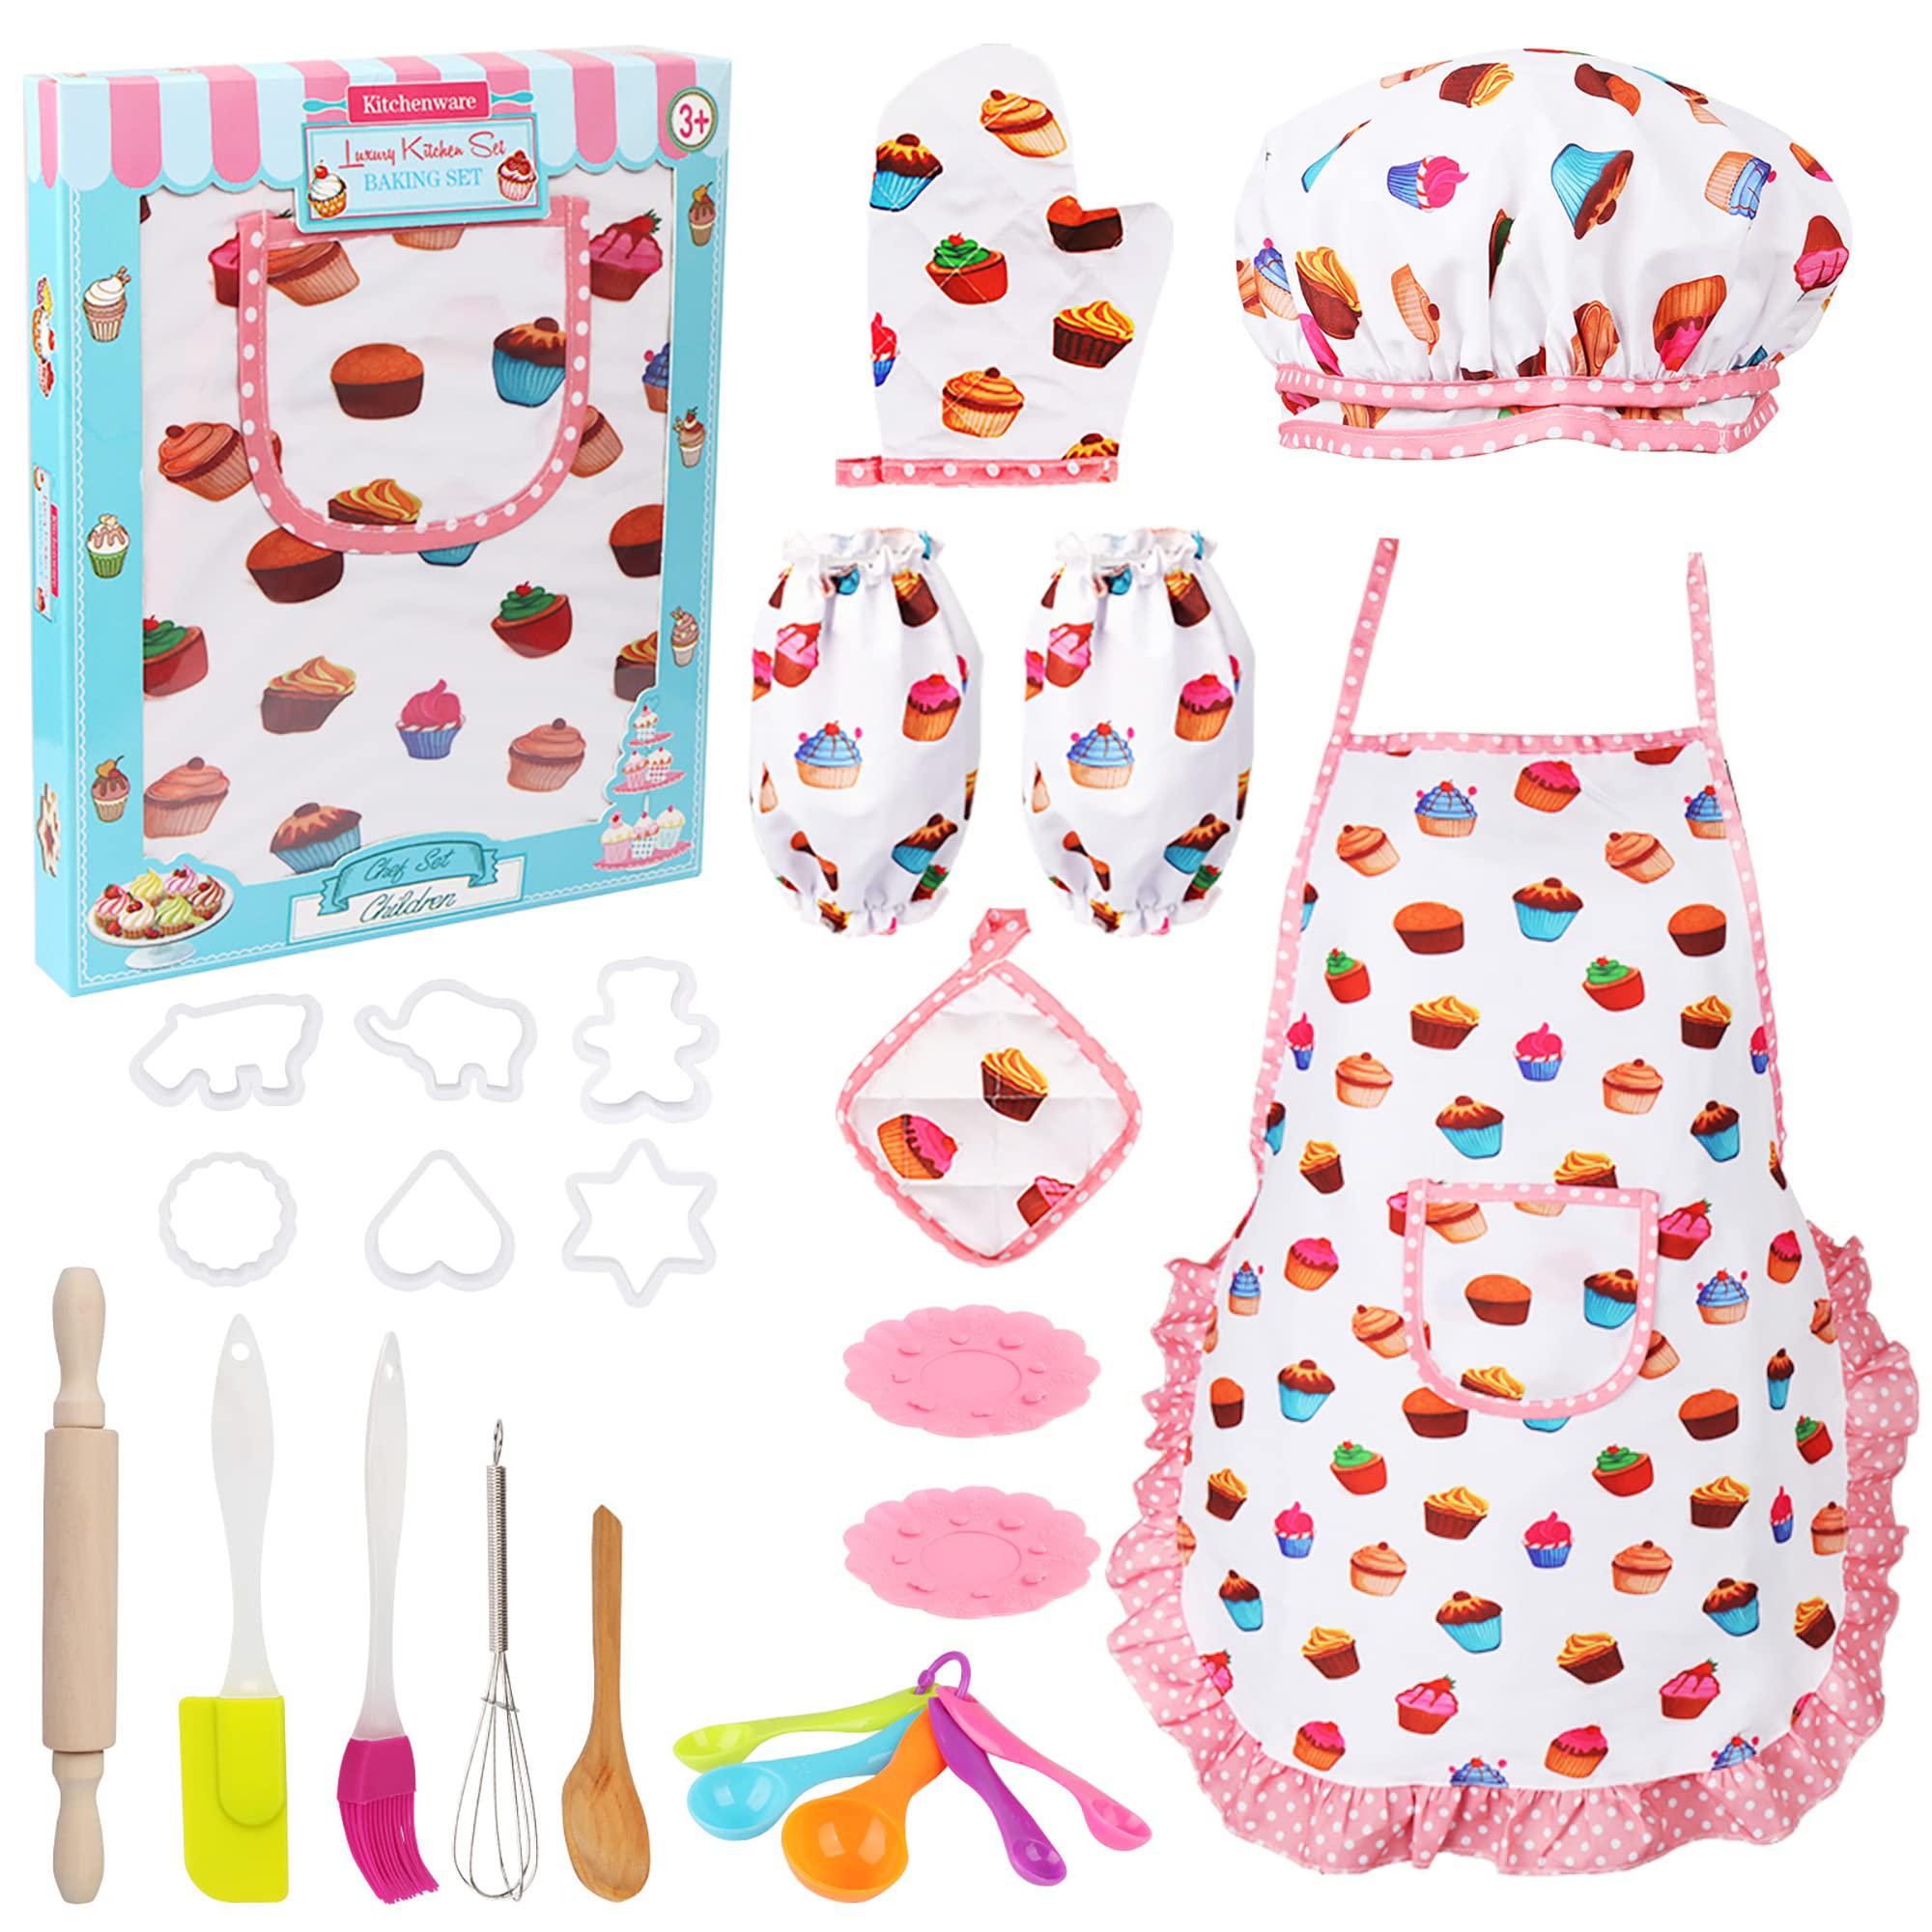 Vanmor vanmor cute kids cooking and baking sets, 24 pcs kids aprons for girls  toddler chef hat apron dress up chef costume, little g